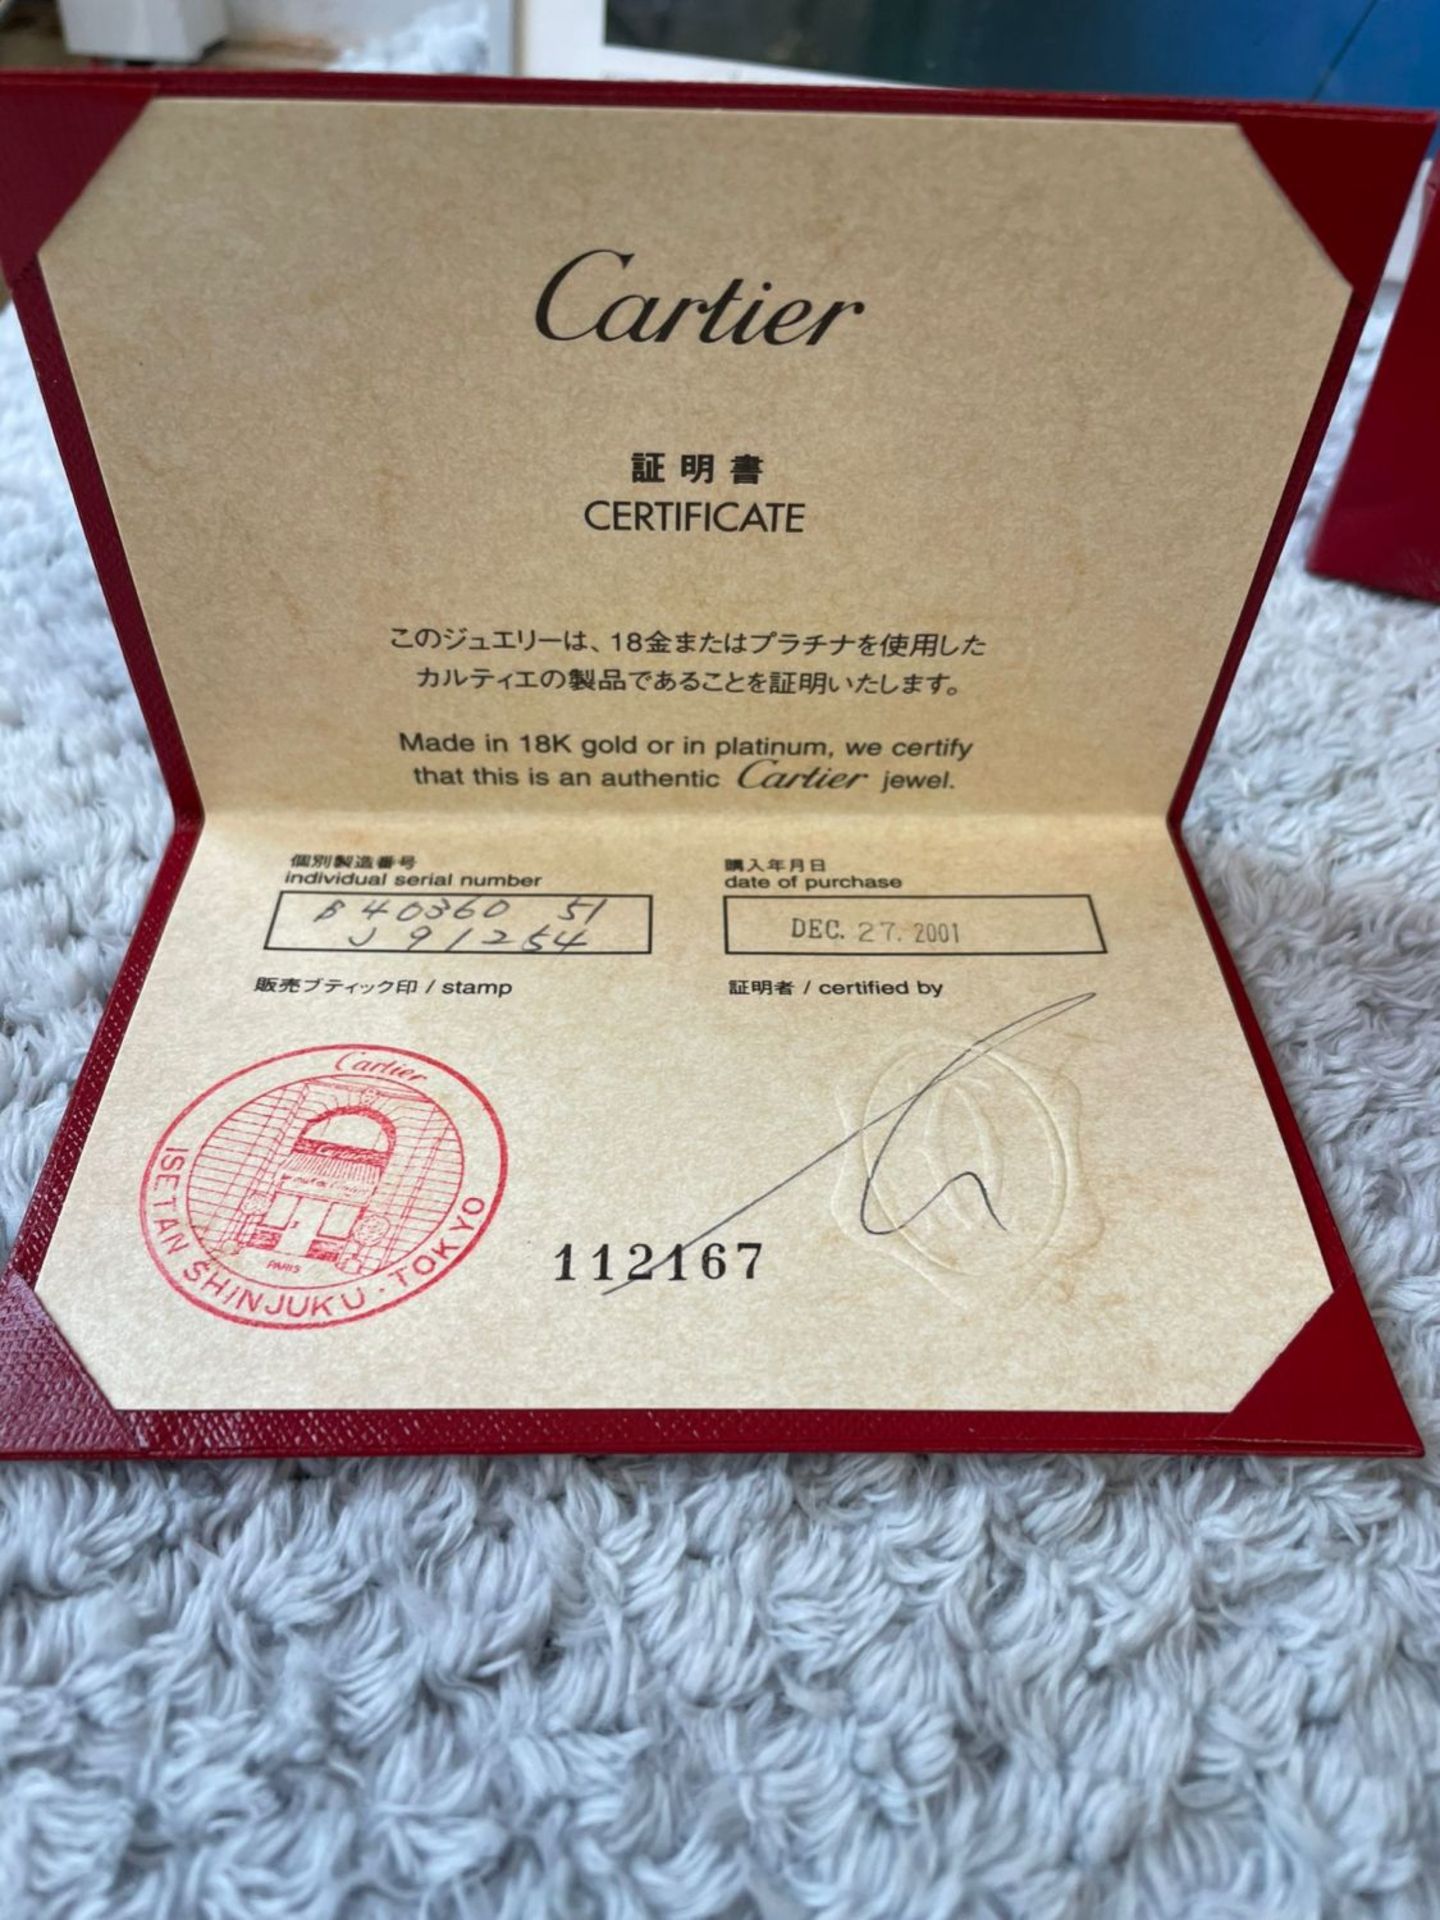 CARTIER - 18K WHITE GOLD / AMETHYST RING WITH BOX & CERTIFICATE - Image 2 of 5